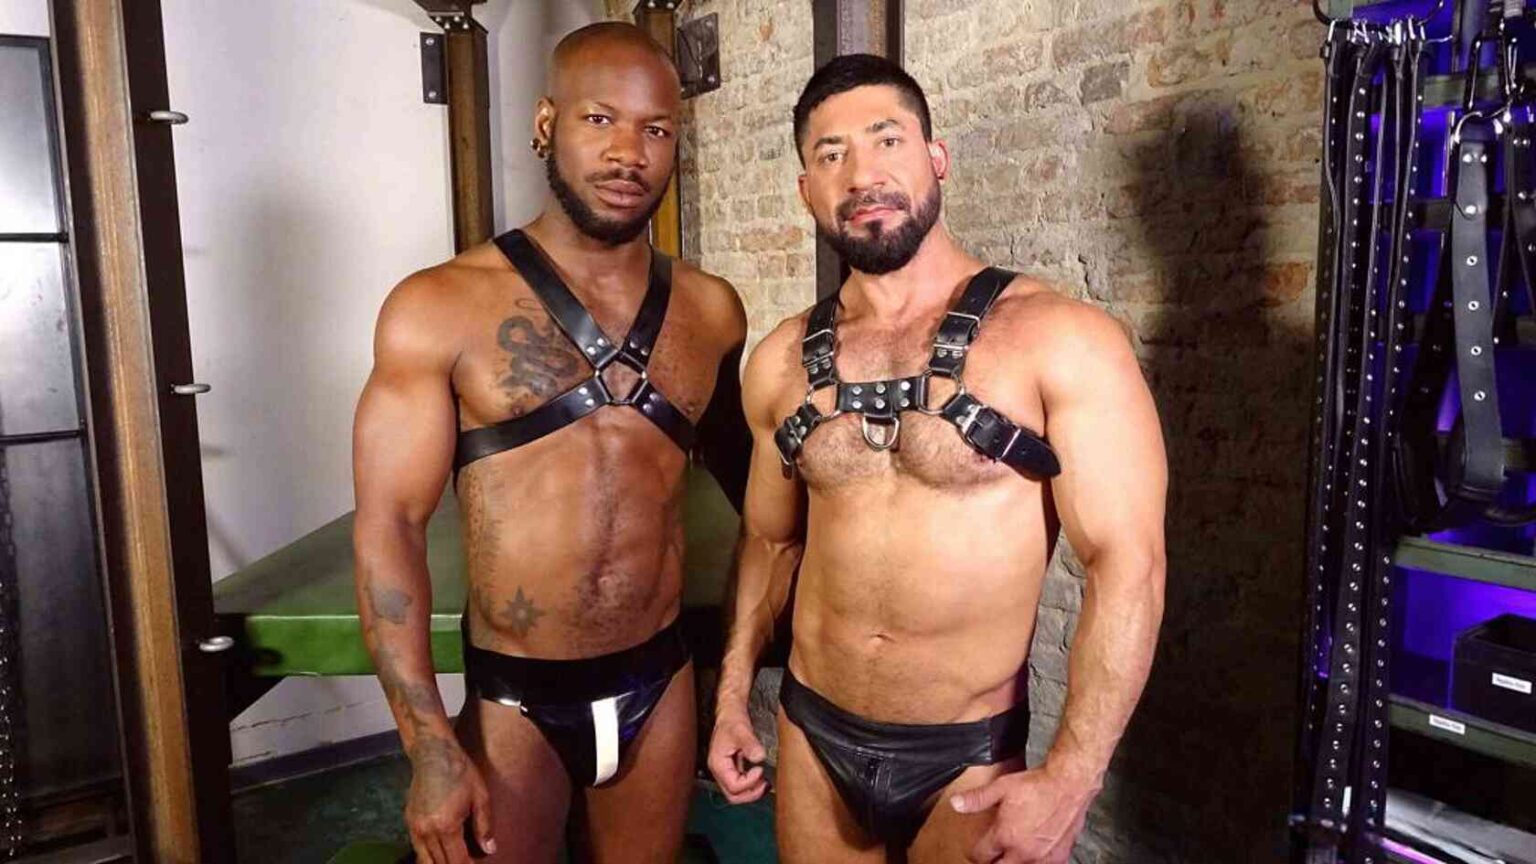 sultan rhodos and bishop black wearing leather harness